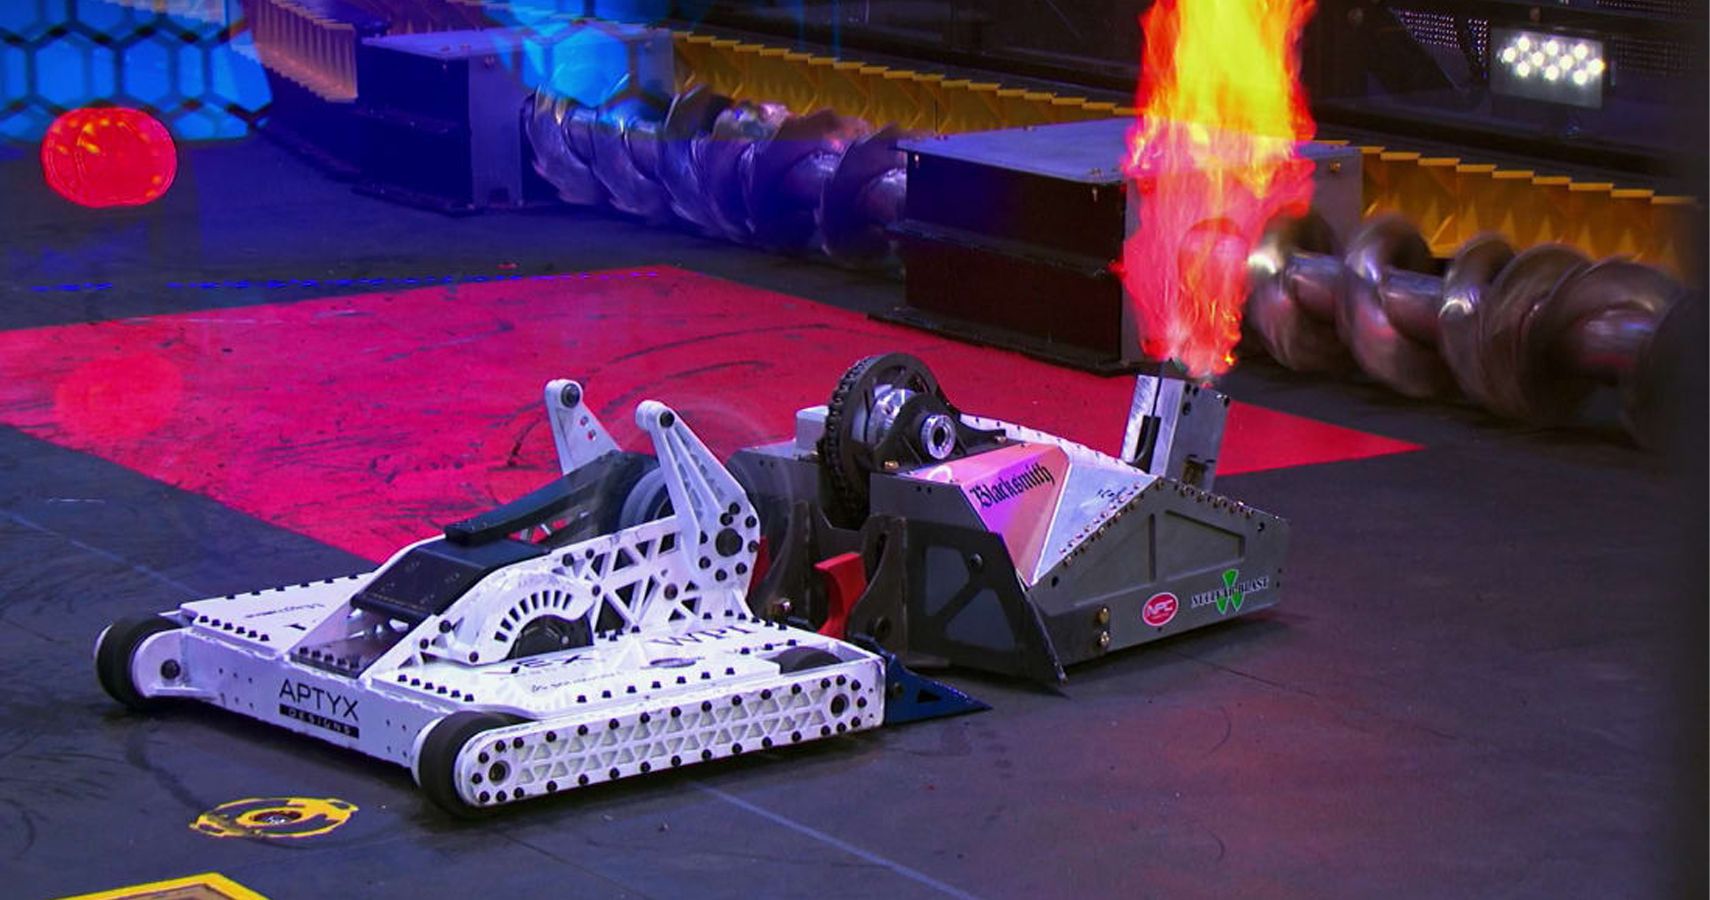 Two robots fight each other in BattleBots